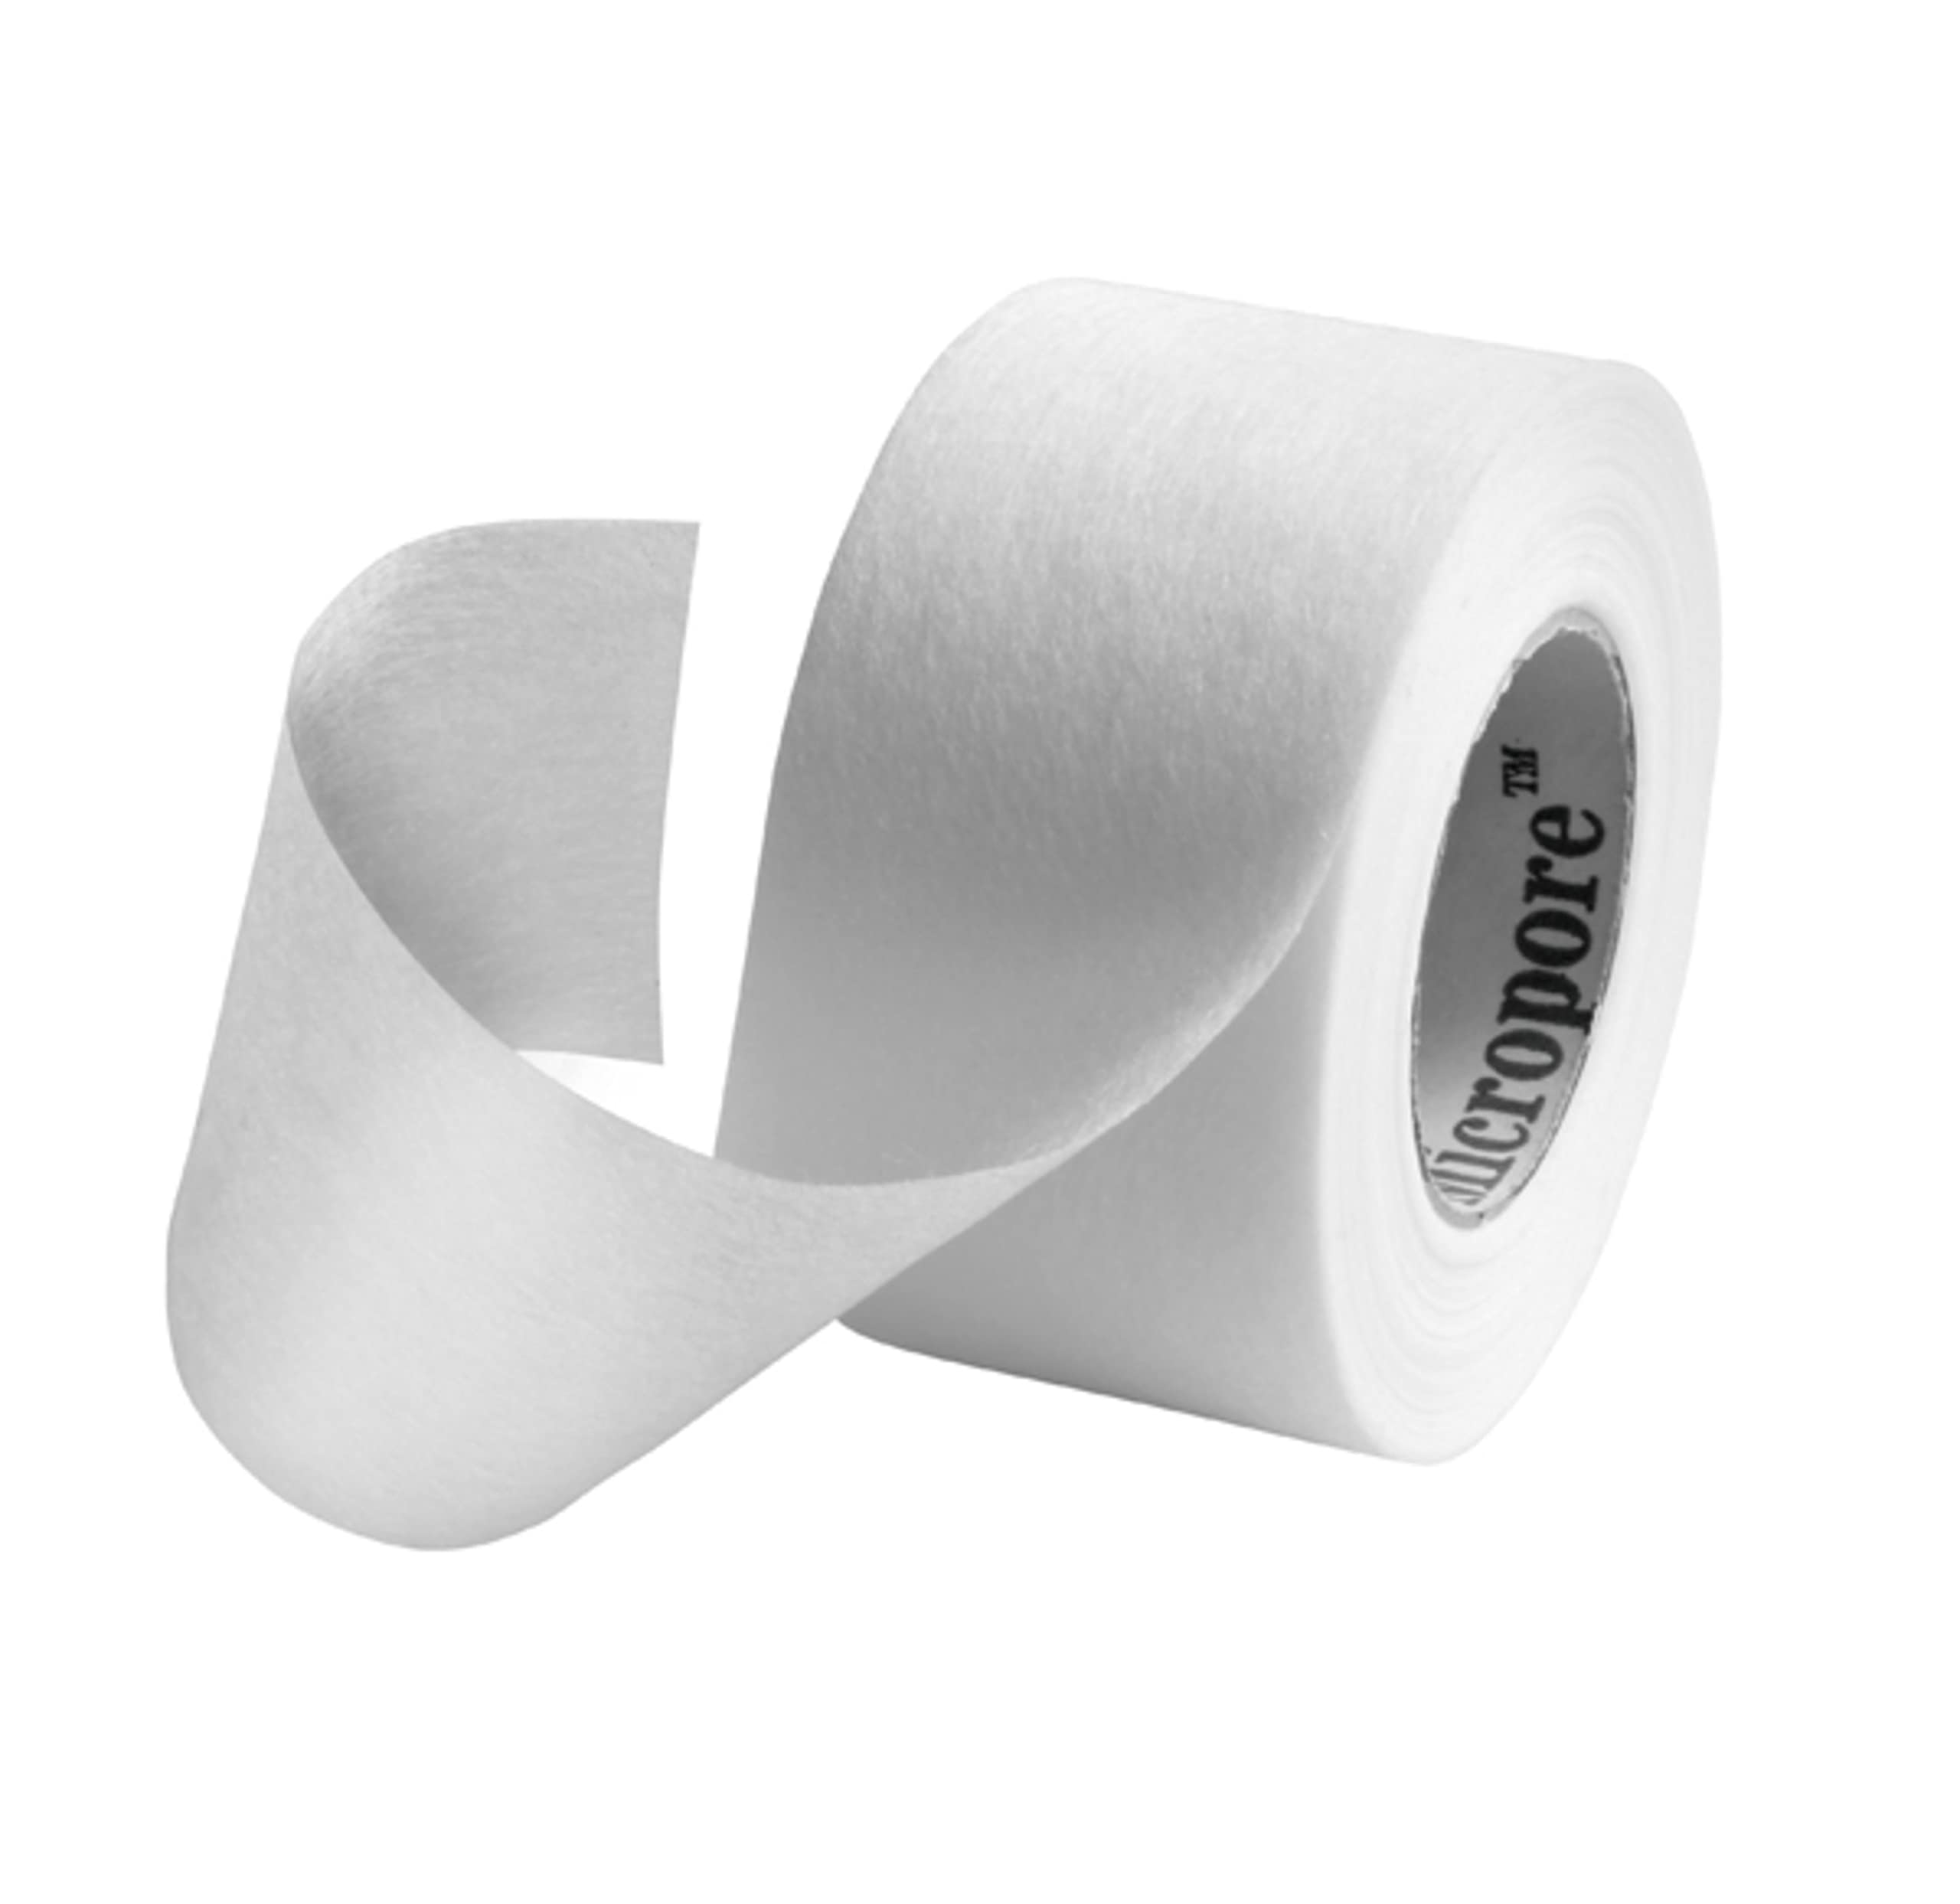 Nexcare Gentle Paper First Aid Tape, Ideal For Securing Gauze And Dressings, 1 In X 10 Yds Carded, 2 Pk